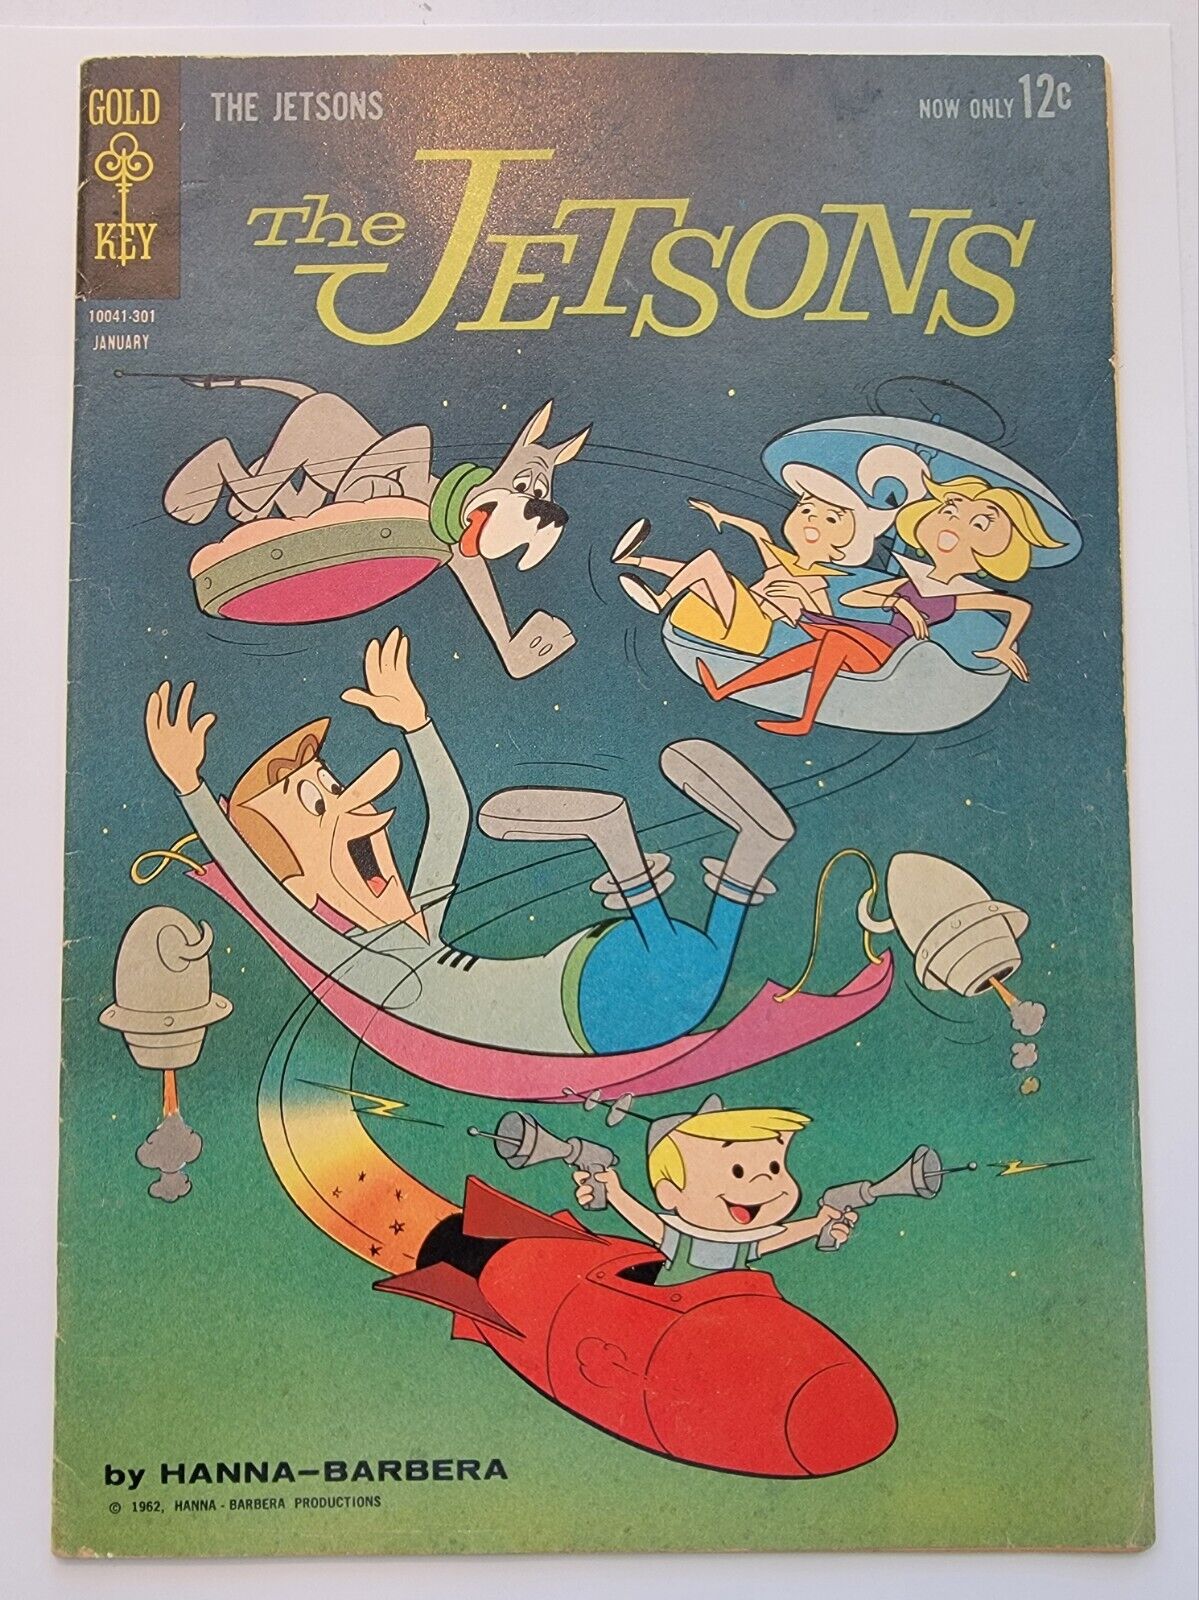 The Jetsons #1 FN 1963 1st App. of The Jetsons ~ Silver Age Gold Key ~ Mid Grade